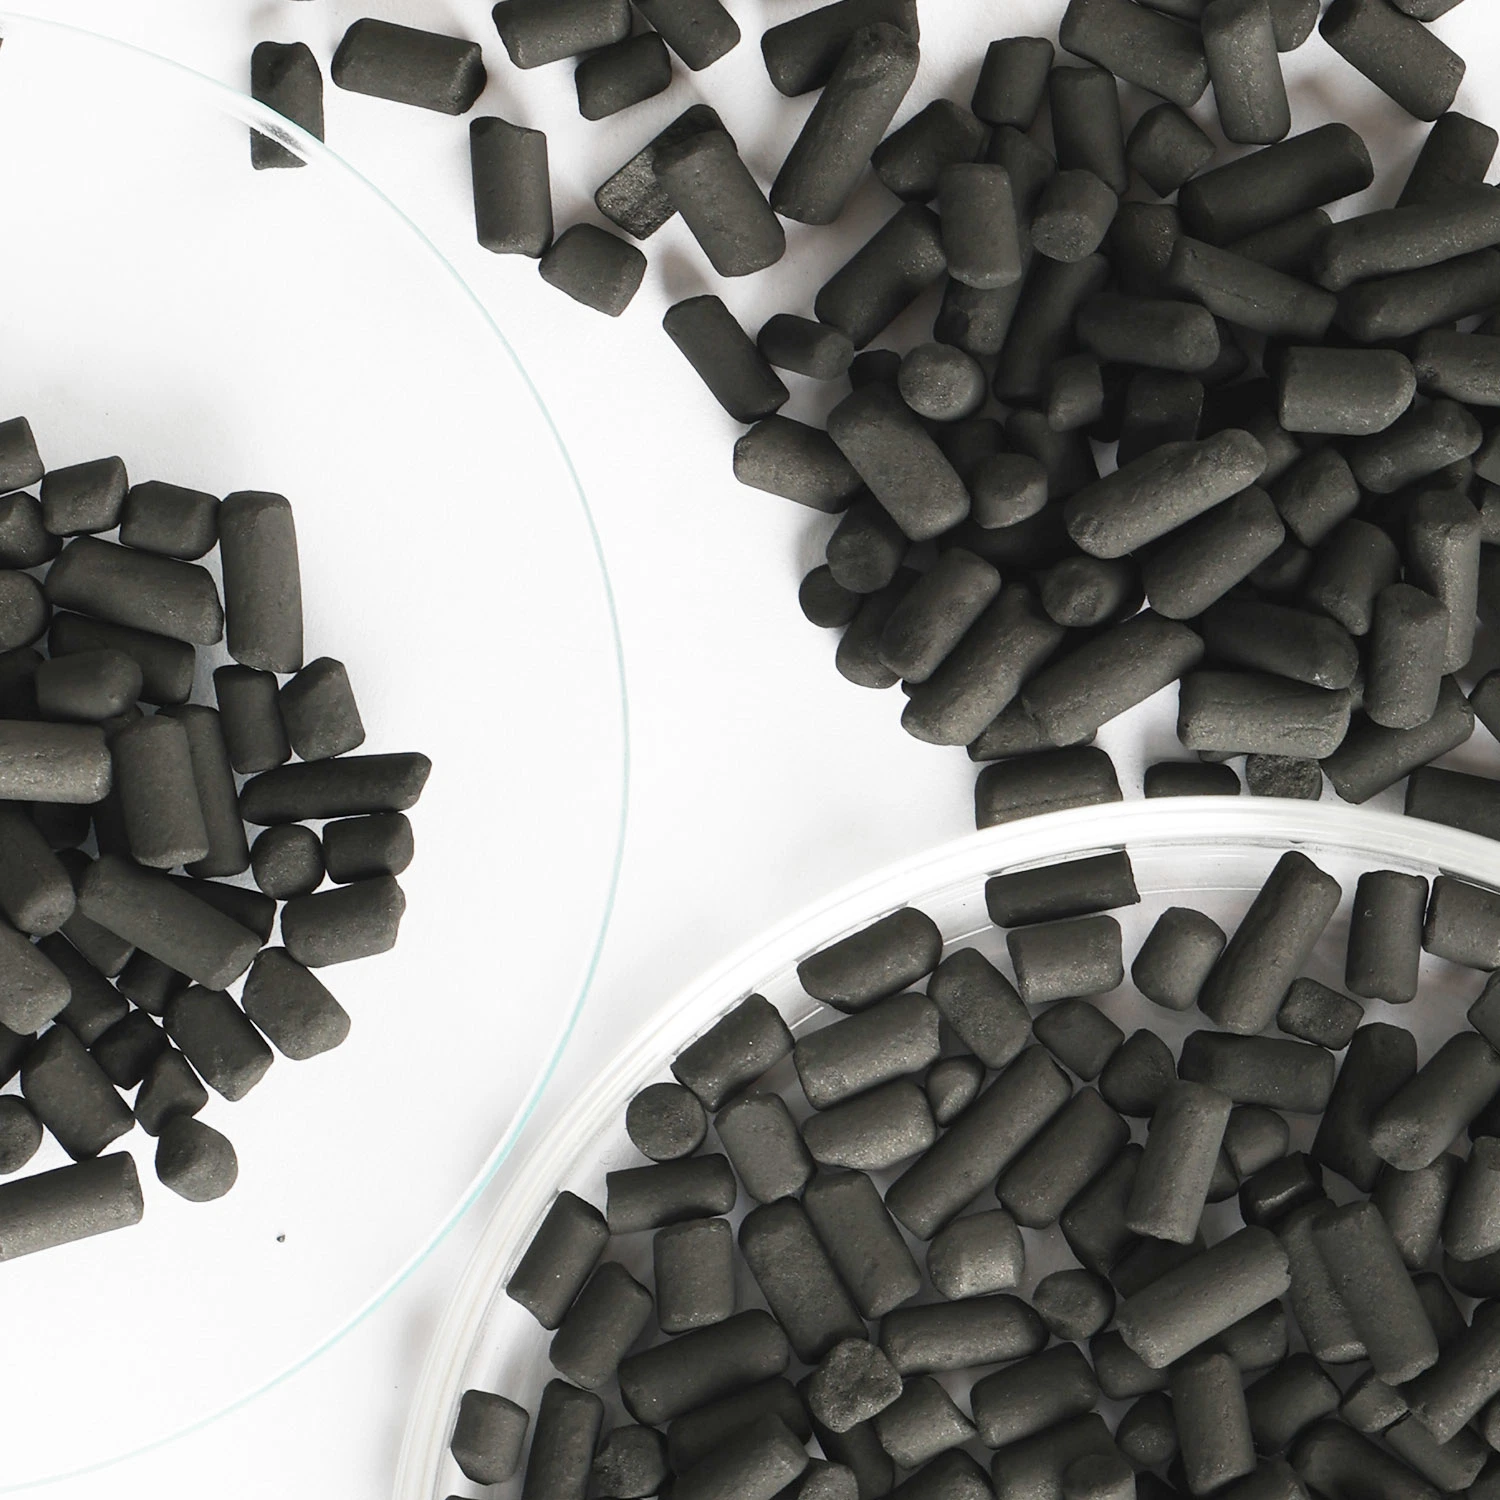 4 mm Available Particle Size Black Coal Columnar Activated Carbon Created for Oil and Gas Desulfurization Treatment